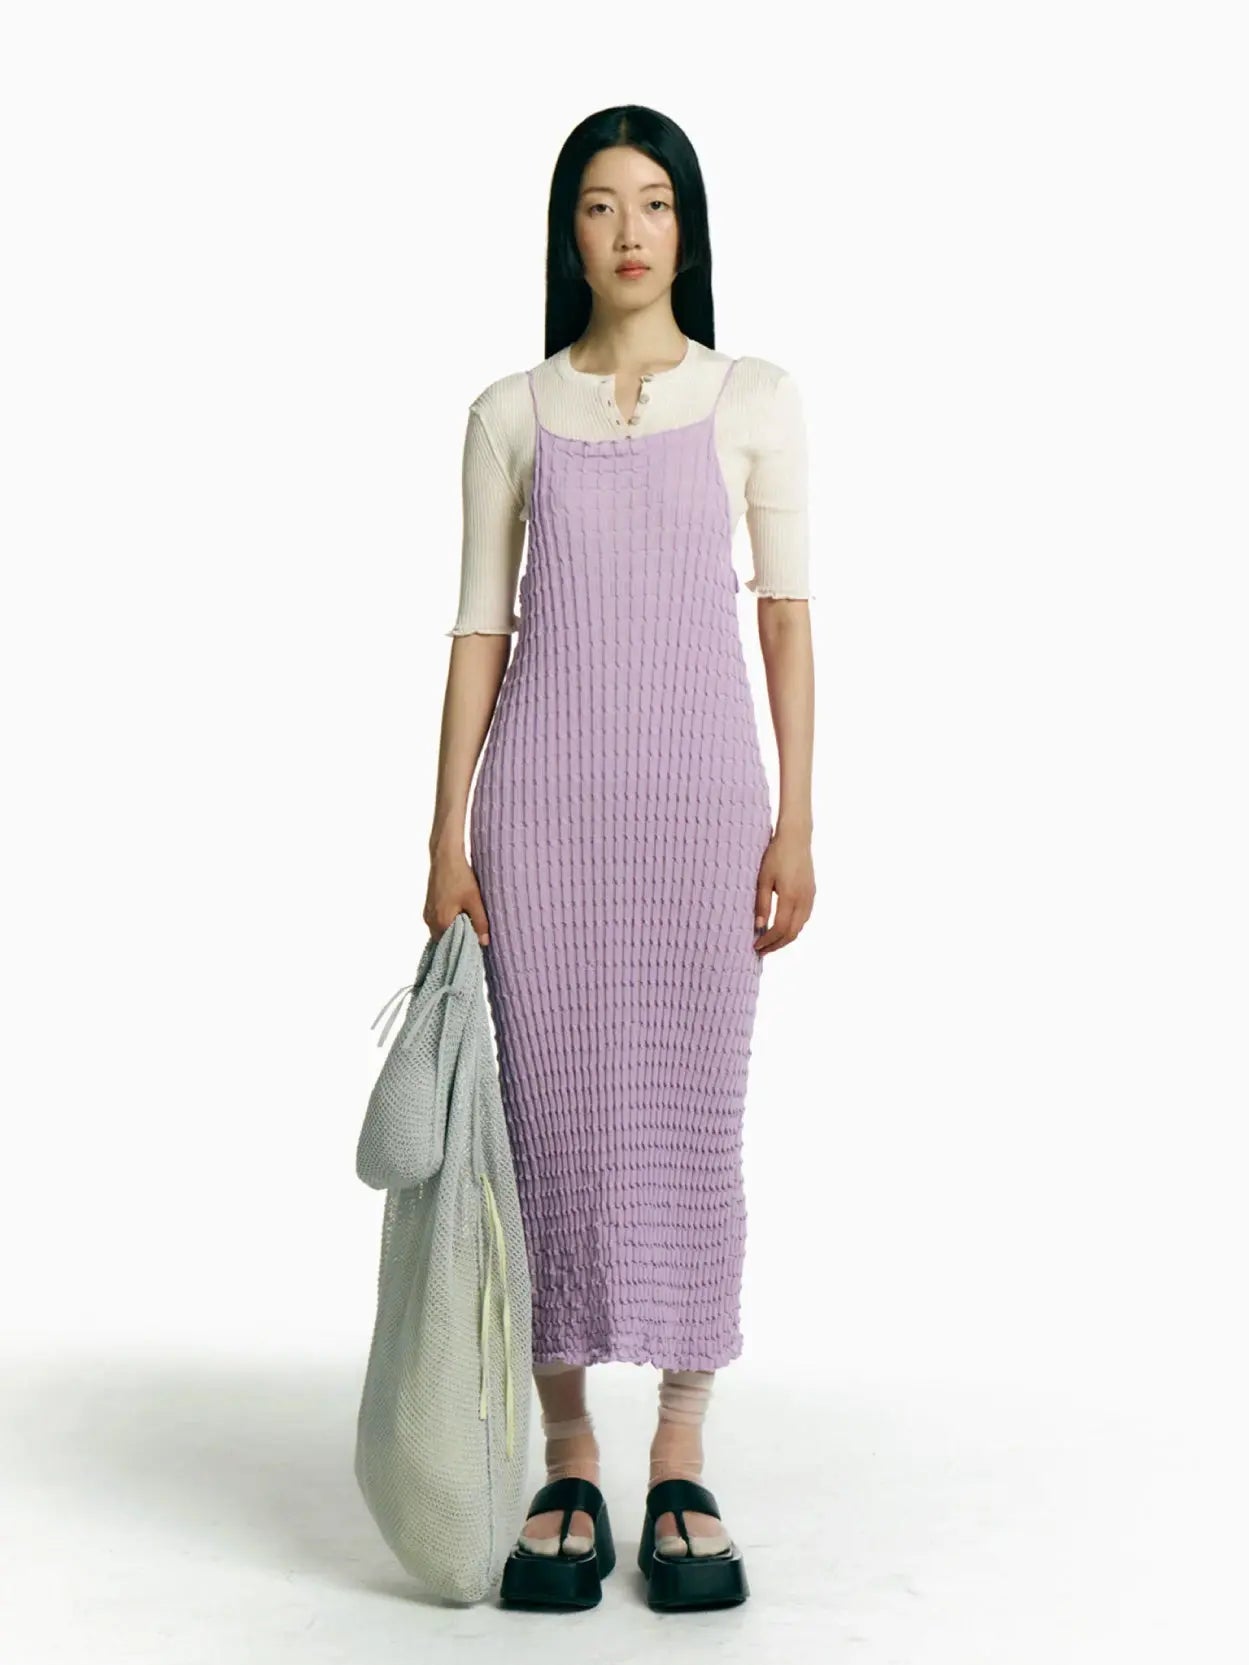 A Rina Dress Pink from Rus featuring a unique textured pattern with intricate, scalloped detailing. The dress has thin spaghetti straps and a long, flowing hem, giving it a stylish and elegant appearance perfect for exploring the streets of Barcelona.